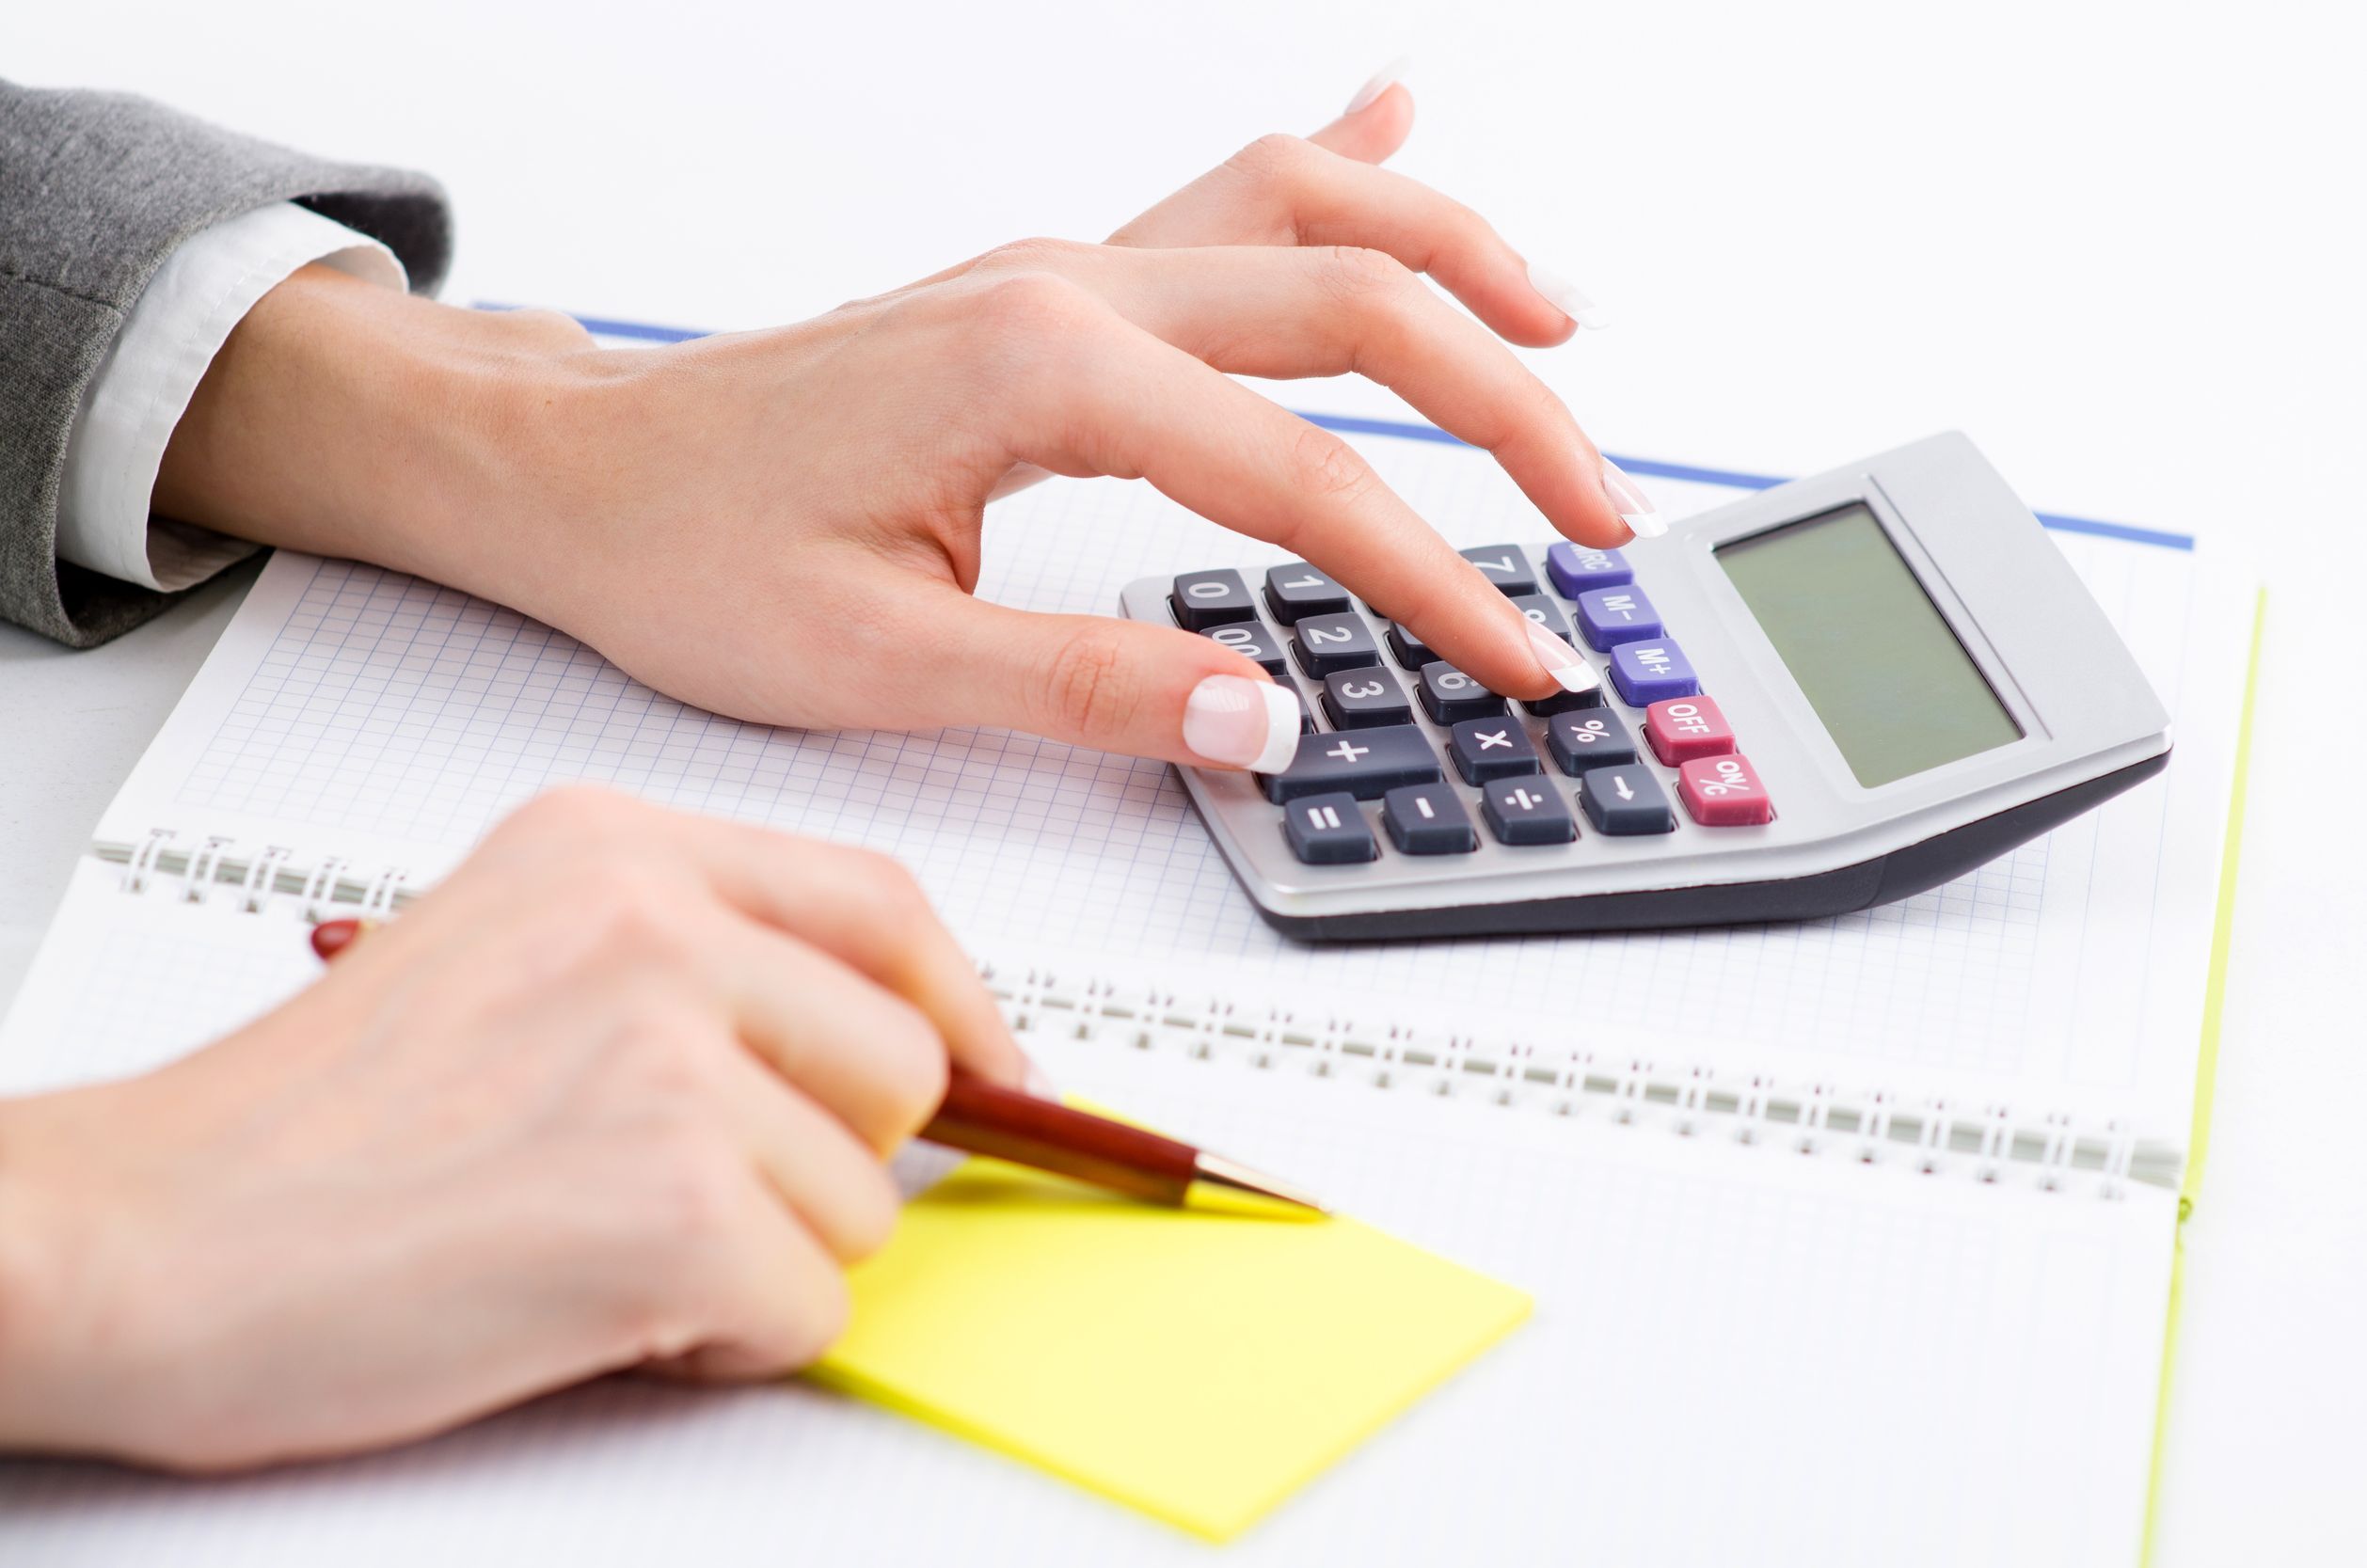 Professional Tax Preparation Services in Brooklyn Can Simplify the Process for You